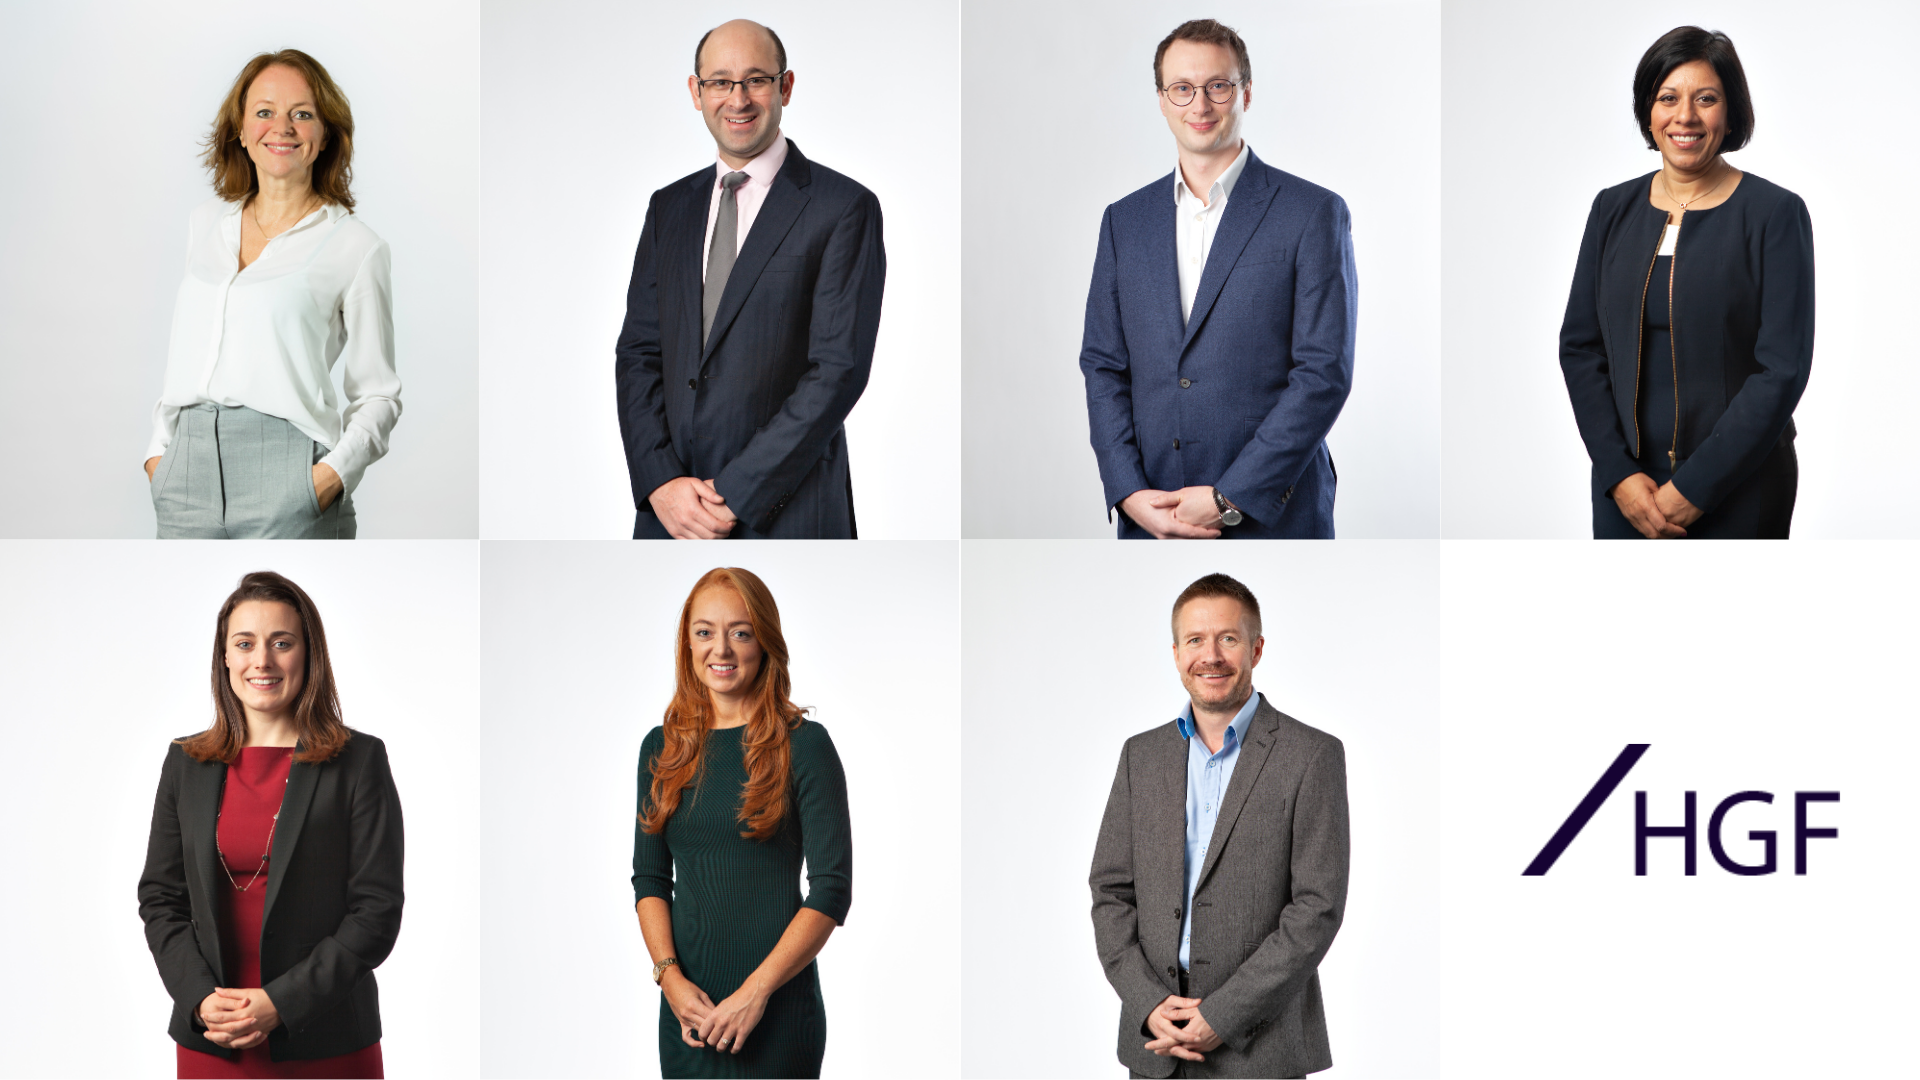 MEMBER NEWS: HGF Continues to Grow With 7 New Promotions